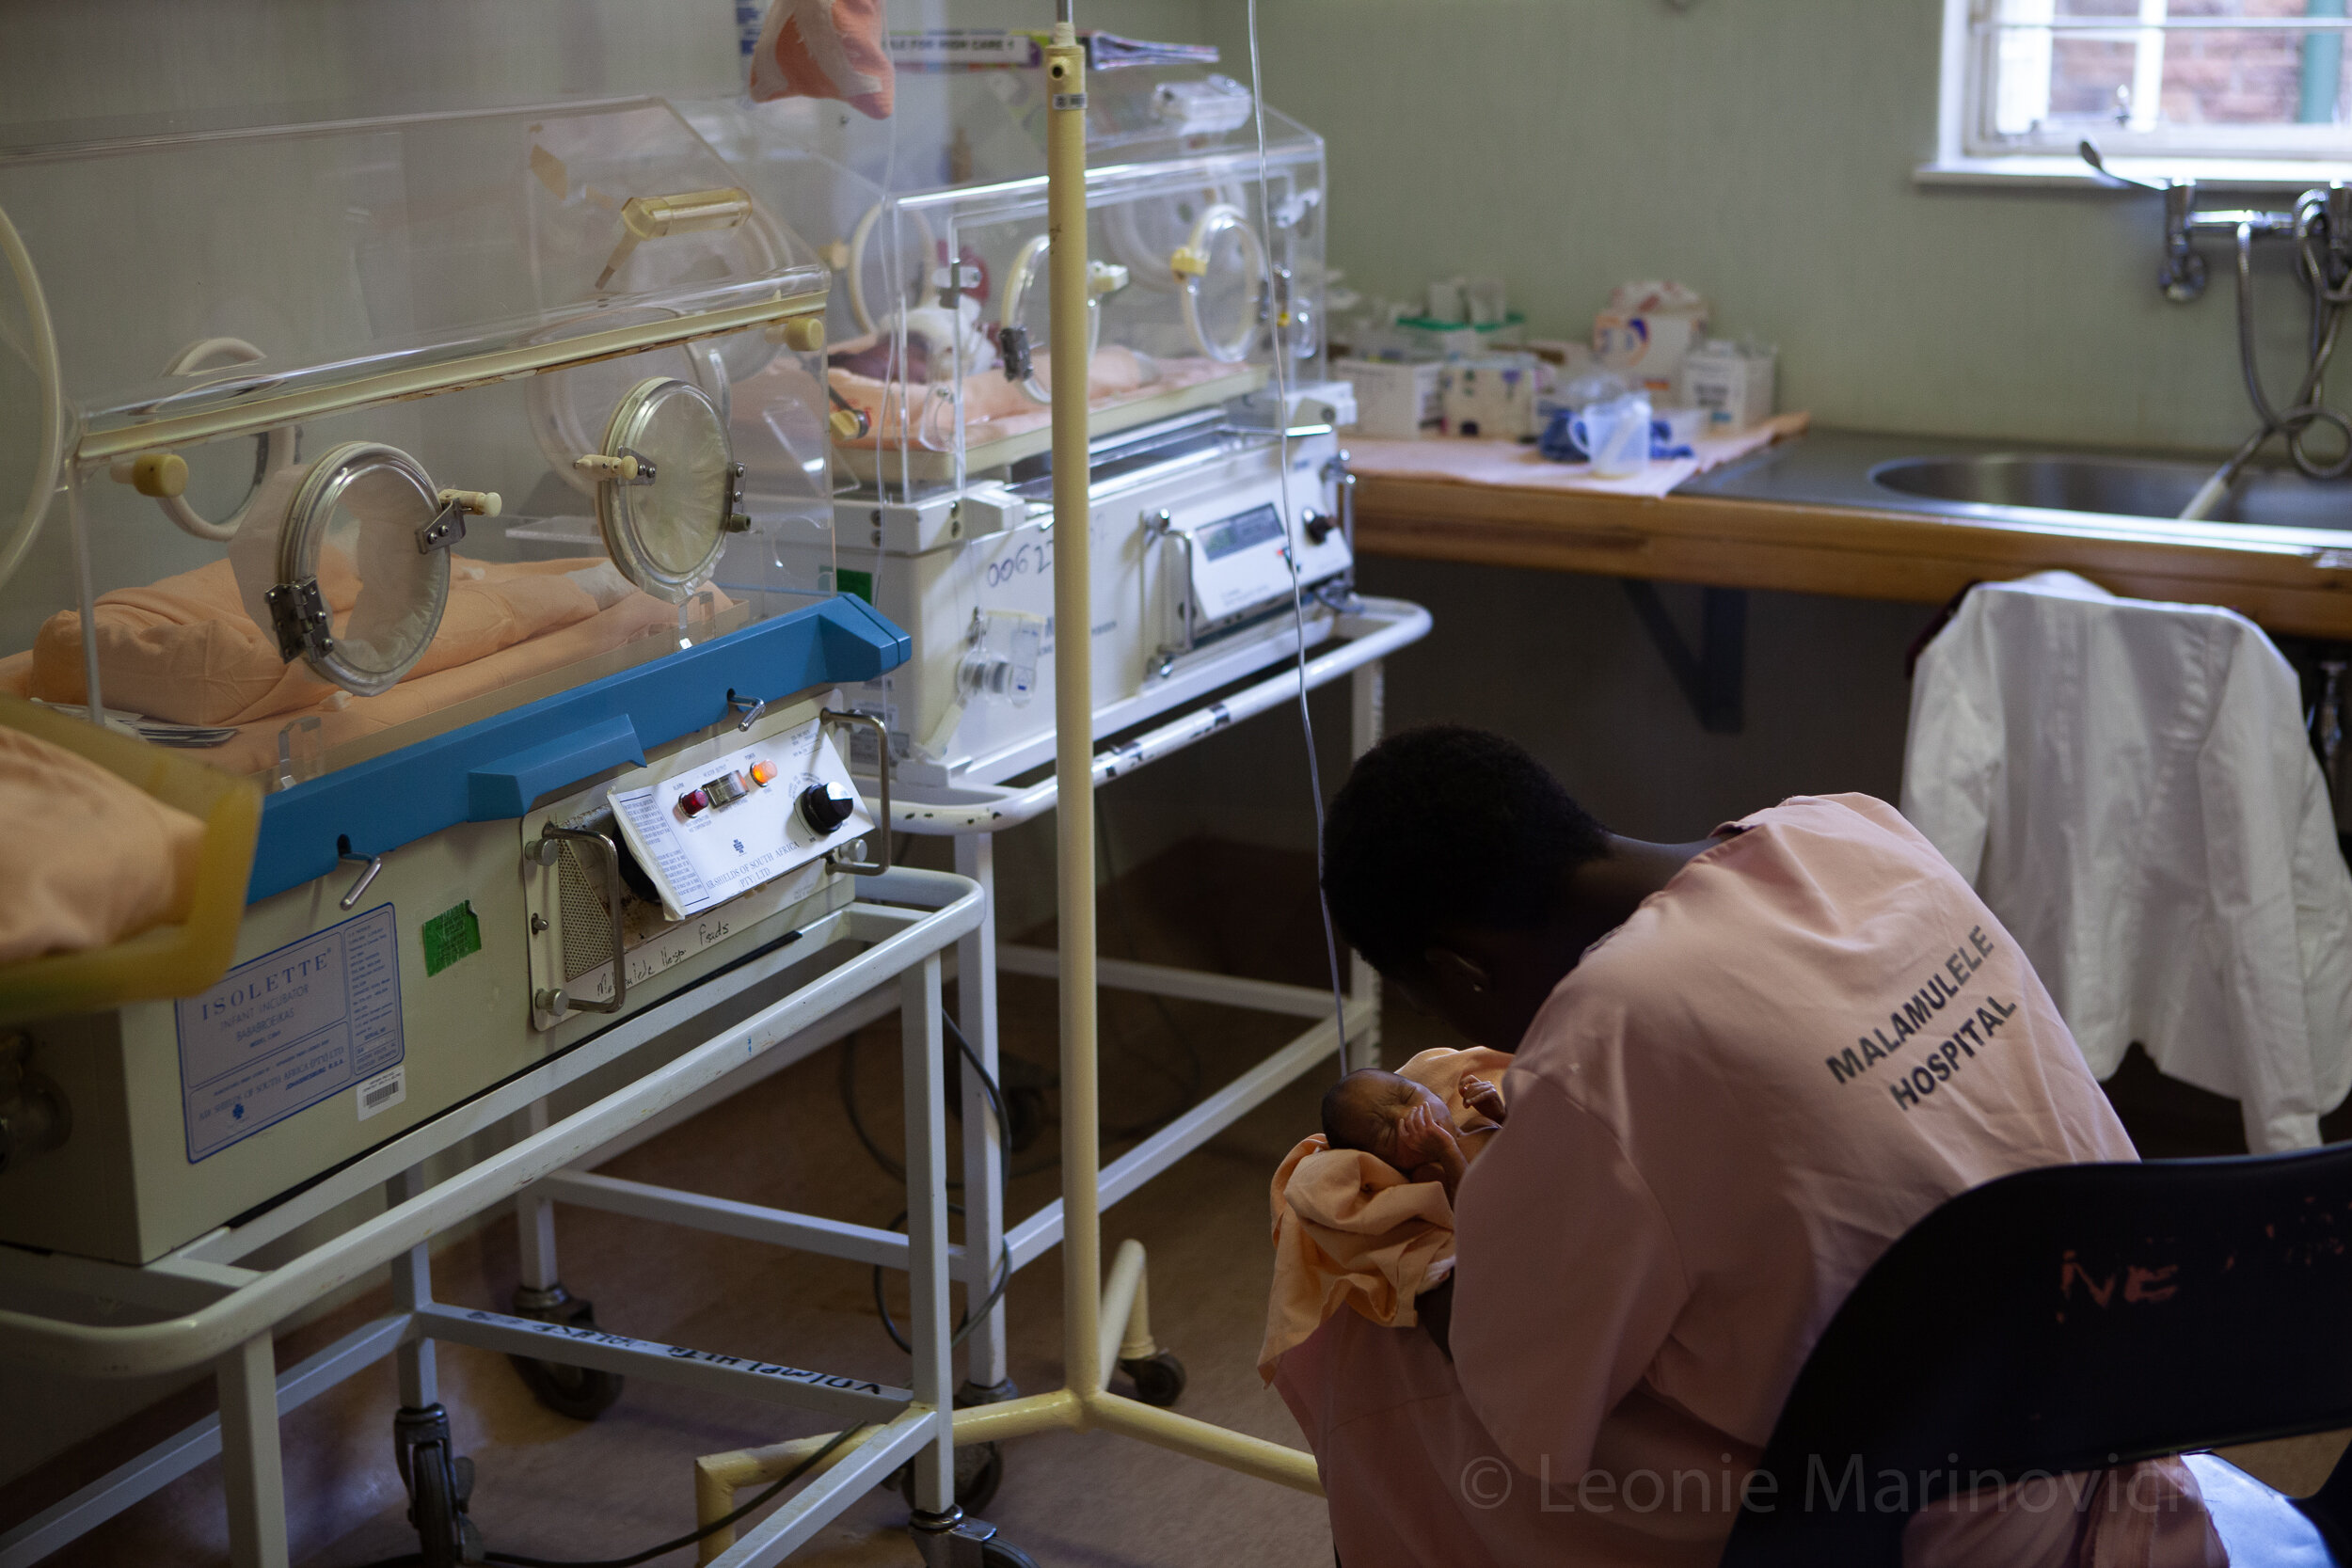  Yvone Mabasa, mother of 4-day old twins, takes care of them in the high care unit at the hospital. Malamulela district hospital is located in the Vhembe region of Limpopo, 200 kilometres from Polokwane, the provincial capital. 